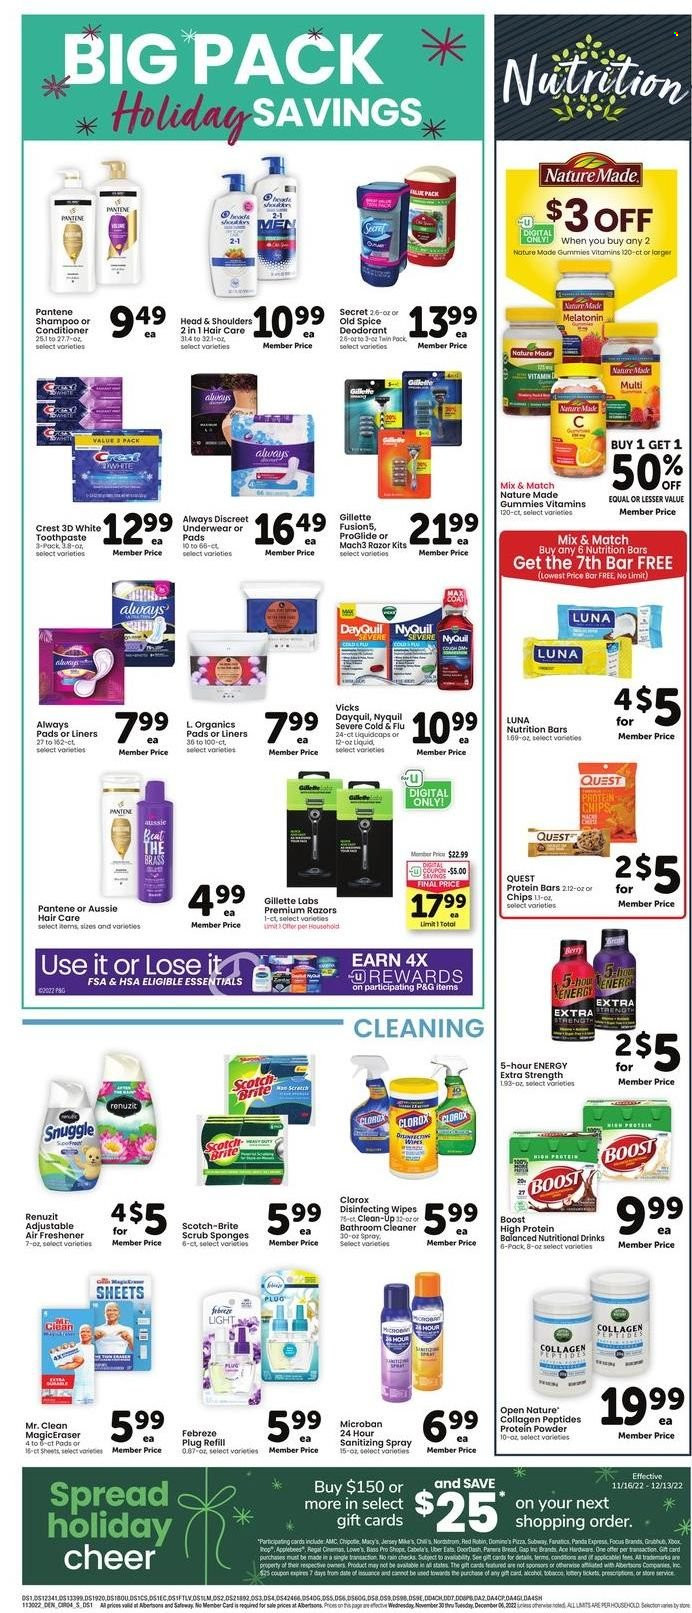 thumbnail - Safeway Flyer - 11/30/2022 - 12/06/2022 - Sales products - Ace, pizza, 7 Days, chips, nutrition bar, protein bar, spice, Boost, wipes, Febreze, cleaner, Clorox, Snuggle, shampoo, Old Spice, toothpaste, Crest, Always pads, sanitary pads, Always Discreet, Aussie, conditioner, Head & Shoulders, Pantene, Gillette, razor, sponge, Renuzit, air freshener, panda, DayQuil, Cold & Flu, Melatonin, Nature Made, NyQuil, whey protein, Vicks. Page 4.